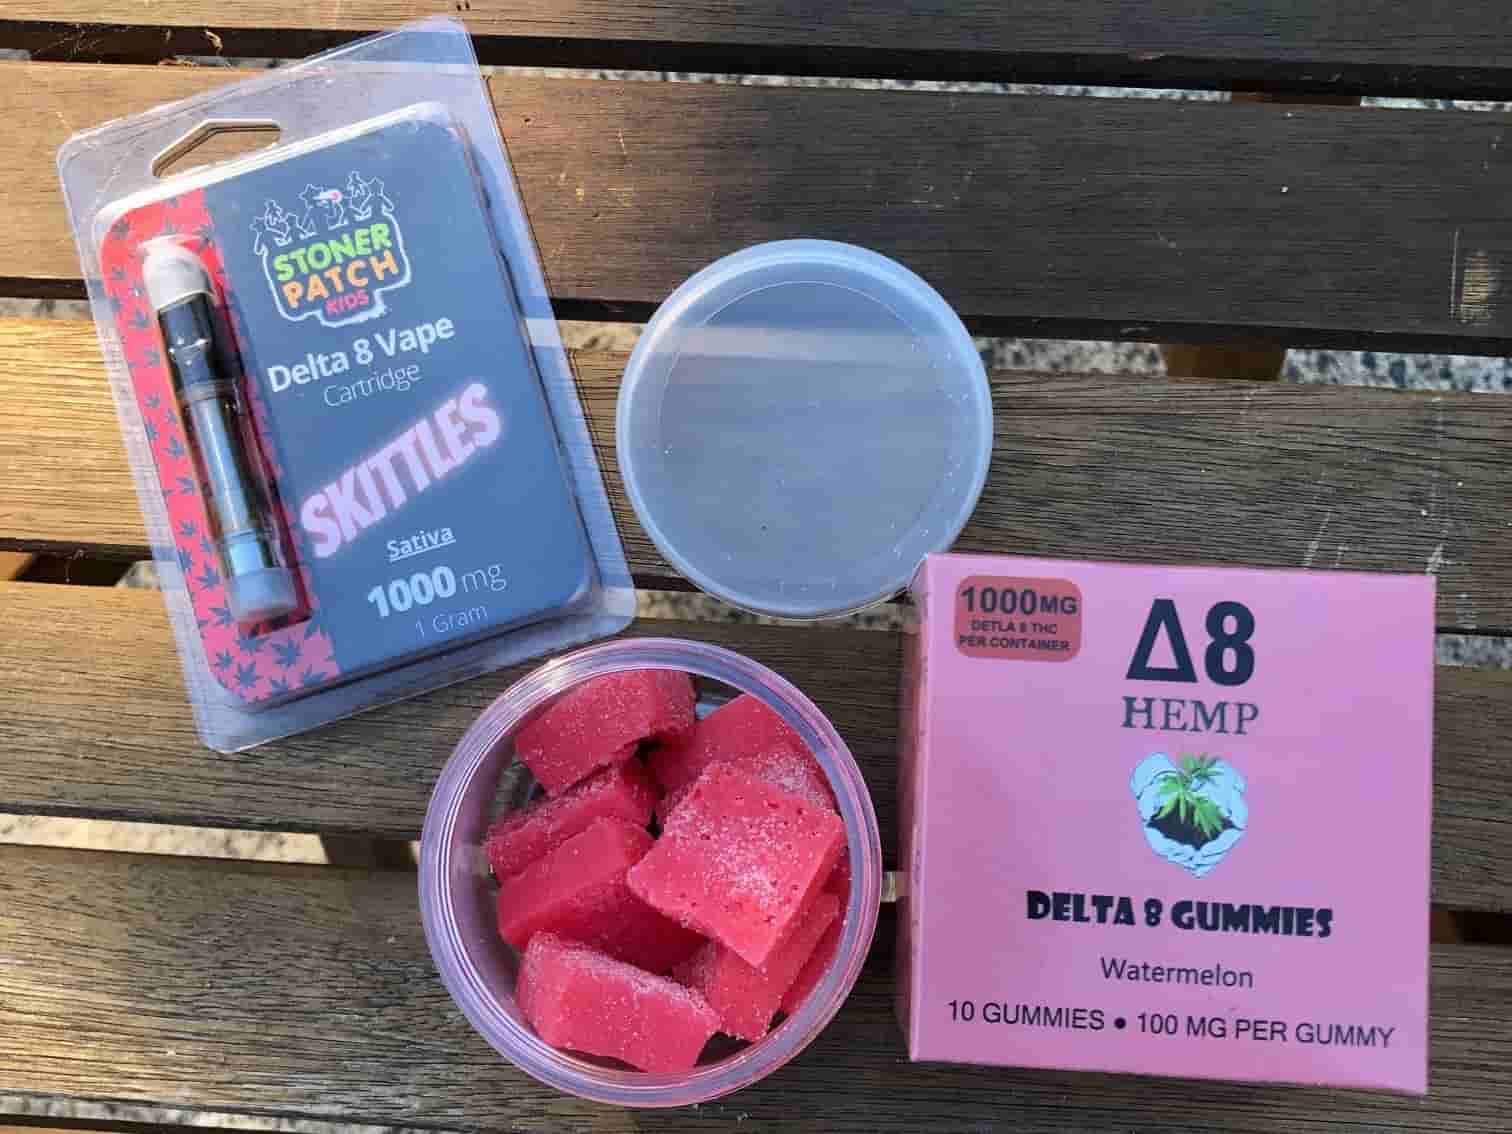 DELTA 8 LEGAL DELAWARE - Gummies|Thc|Products|Hemp|Product|Brand|Effects|Delta|Gummy|Cbd|Origin|Quality|Dosage|Delta-8|Dose|Usasource|Flavors|Brands|Ingredients|Range|Customers|Edibles|Cartridges|Reviews|Side|List|Health|Cannabis|Lab|Customer|Options|Benefits|Overviewproducts|Research|Time|Market|Drug|Farms|Party|People|Delta-8 Thc|Delta-8 Products|Delta-9 Thc|Delta-8 Gummies|Delta-8 Thc Products|Delta-8 Brands|Customer Reviews|Brand Overviewproducts|Drug Tests|Free Shipping|Similar Benefits|Vape Cartridges|Hemp Doctor|United States|Third Party Lab|Drug Test|Thc Edibles|Health Canada|Cannabis Plant|Side Effects|Organic Hemp|Diamond Cbd|Reaction Time|Legal Hemp|Psychoactive Effects|Psychoactive Properties|Third Party|Dry Eyes|Delta-8 Market|Tolerance Level